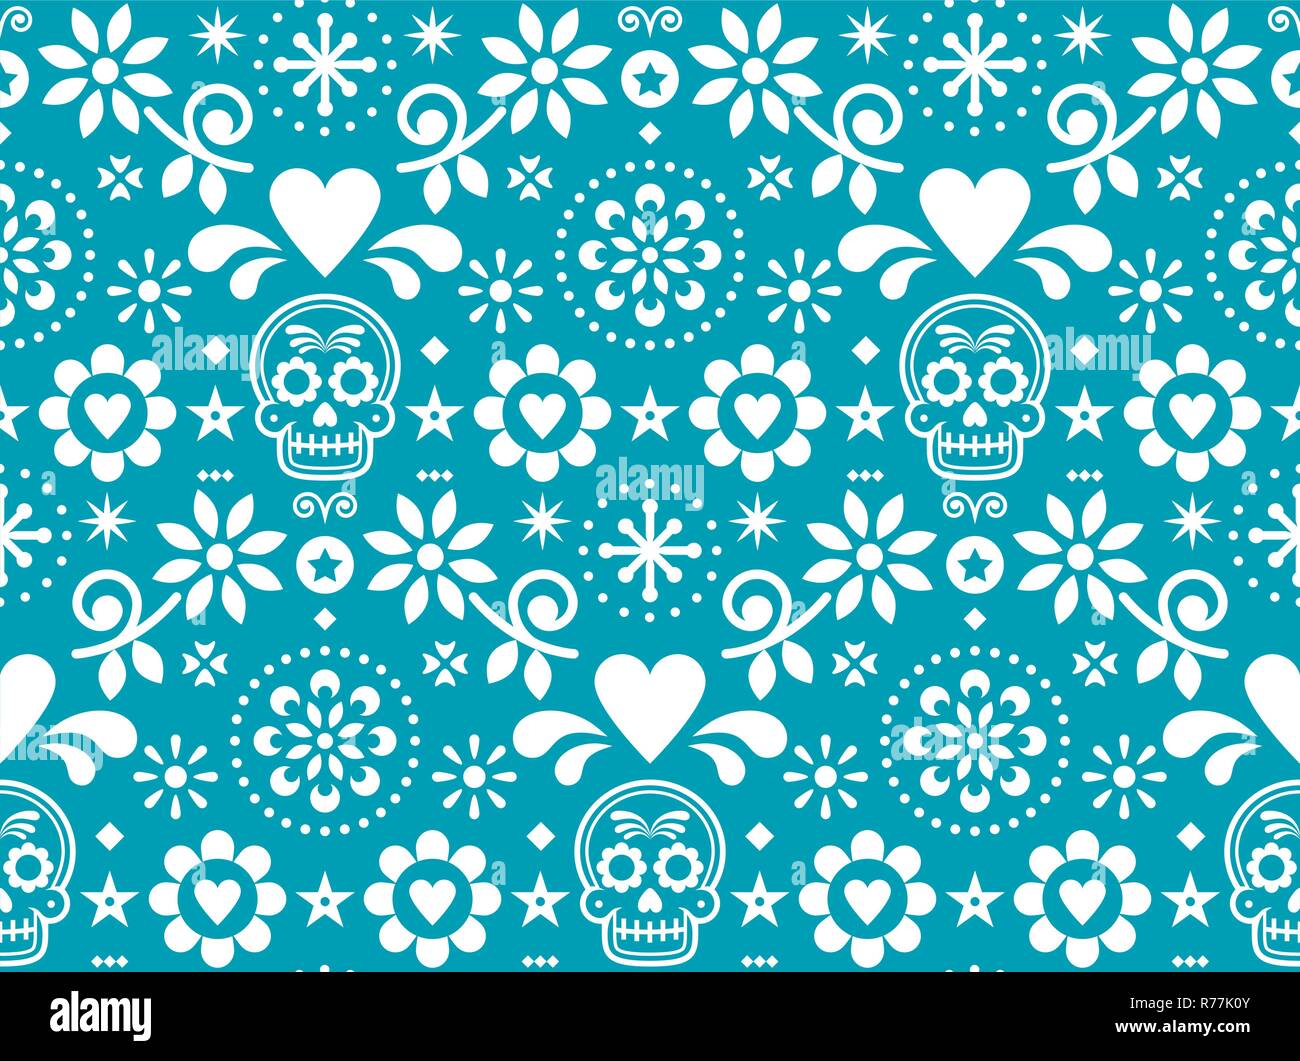 Sugar skull vector seamless pattern inspired by Mexican folk art, Dia de Los Muertos repetitive design in white on turquoise background Stock Vector